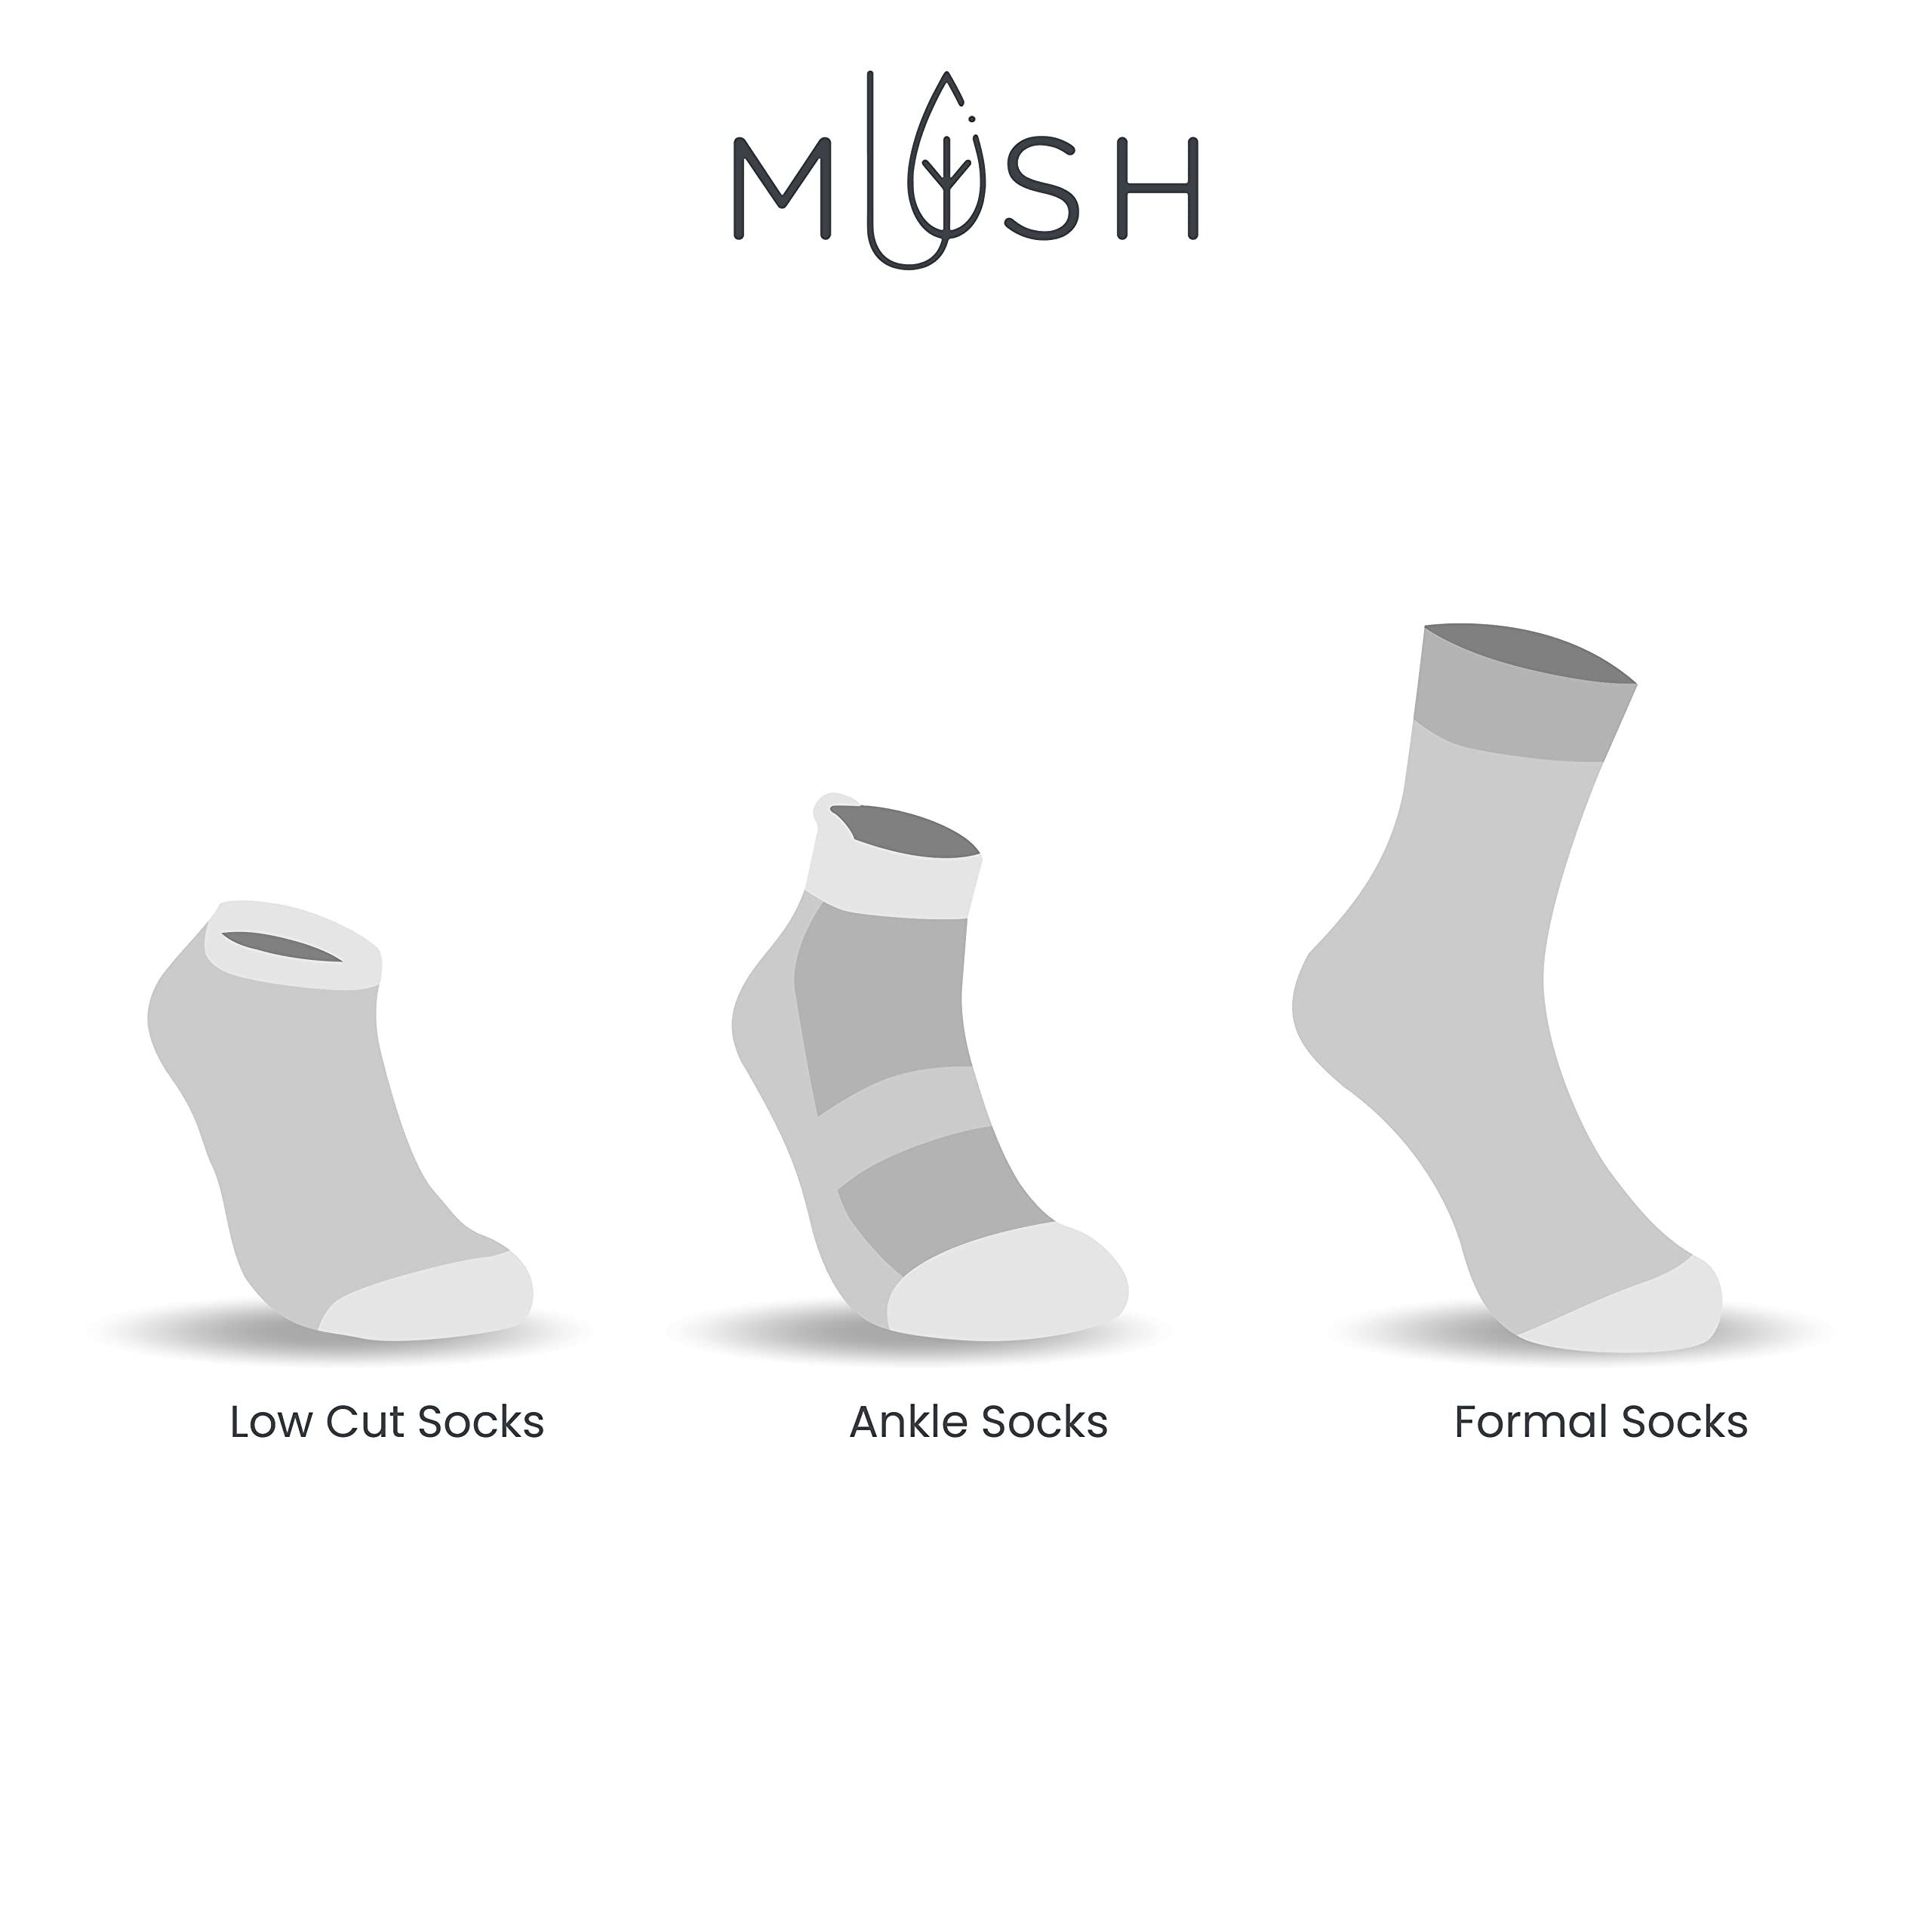 Mush Bamboo Socks for Sports & Casual Wear- Ultra Soft, Anti Odor, Breathable Mesh Design Low Cut Ankle Length Pack of 3,(Navy,Grey,Black) UK Size 6-10